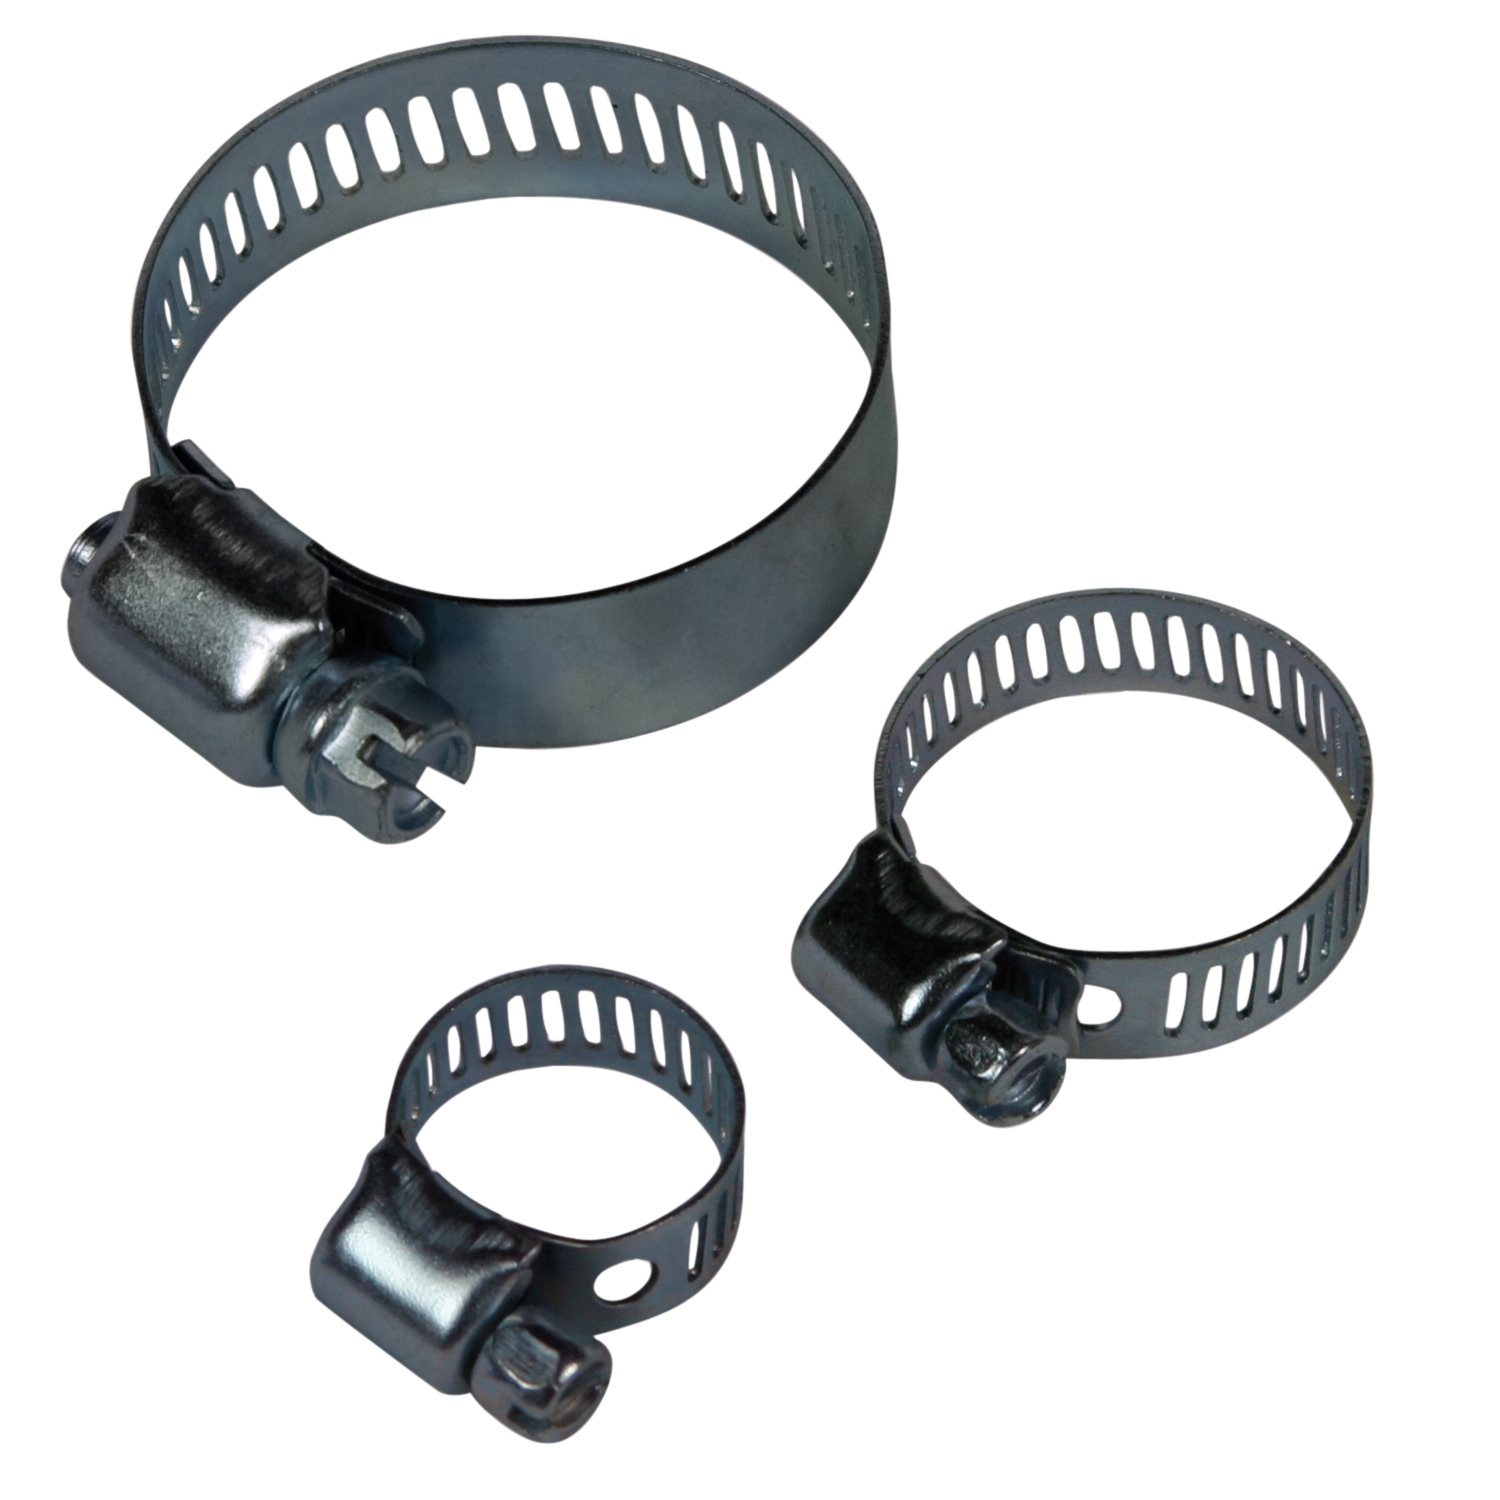 Performance Tools PTW5348 26 PC HOSE CLAMP KIT - MPR Tools & Equipment